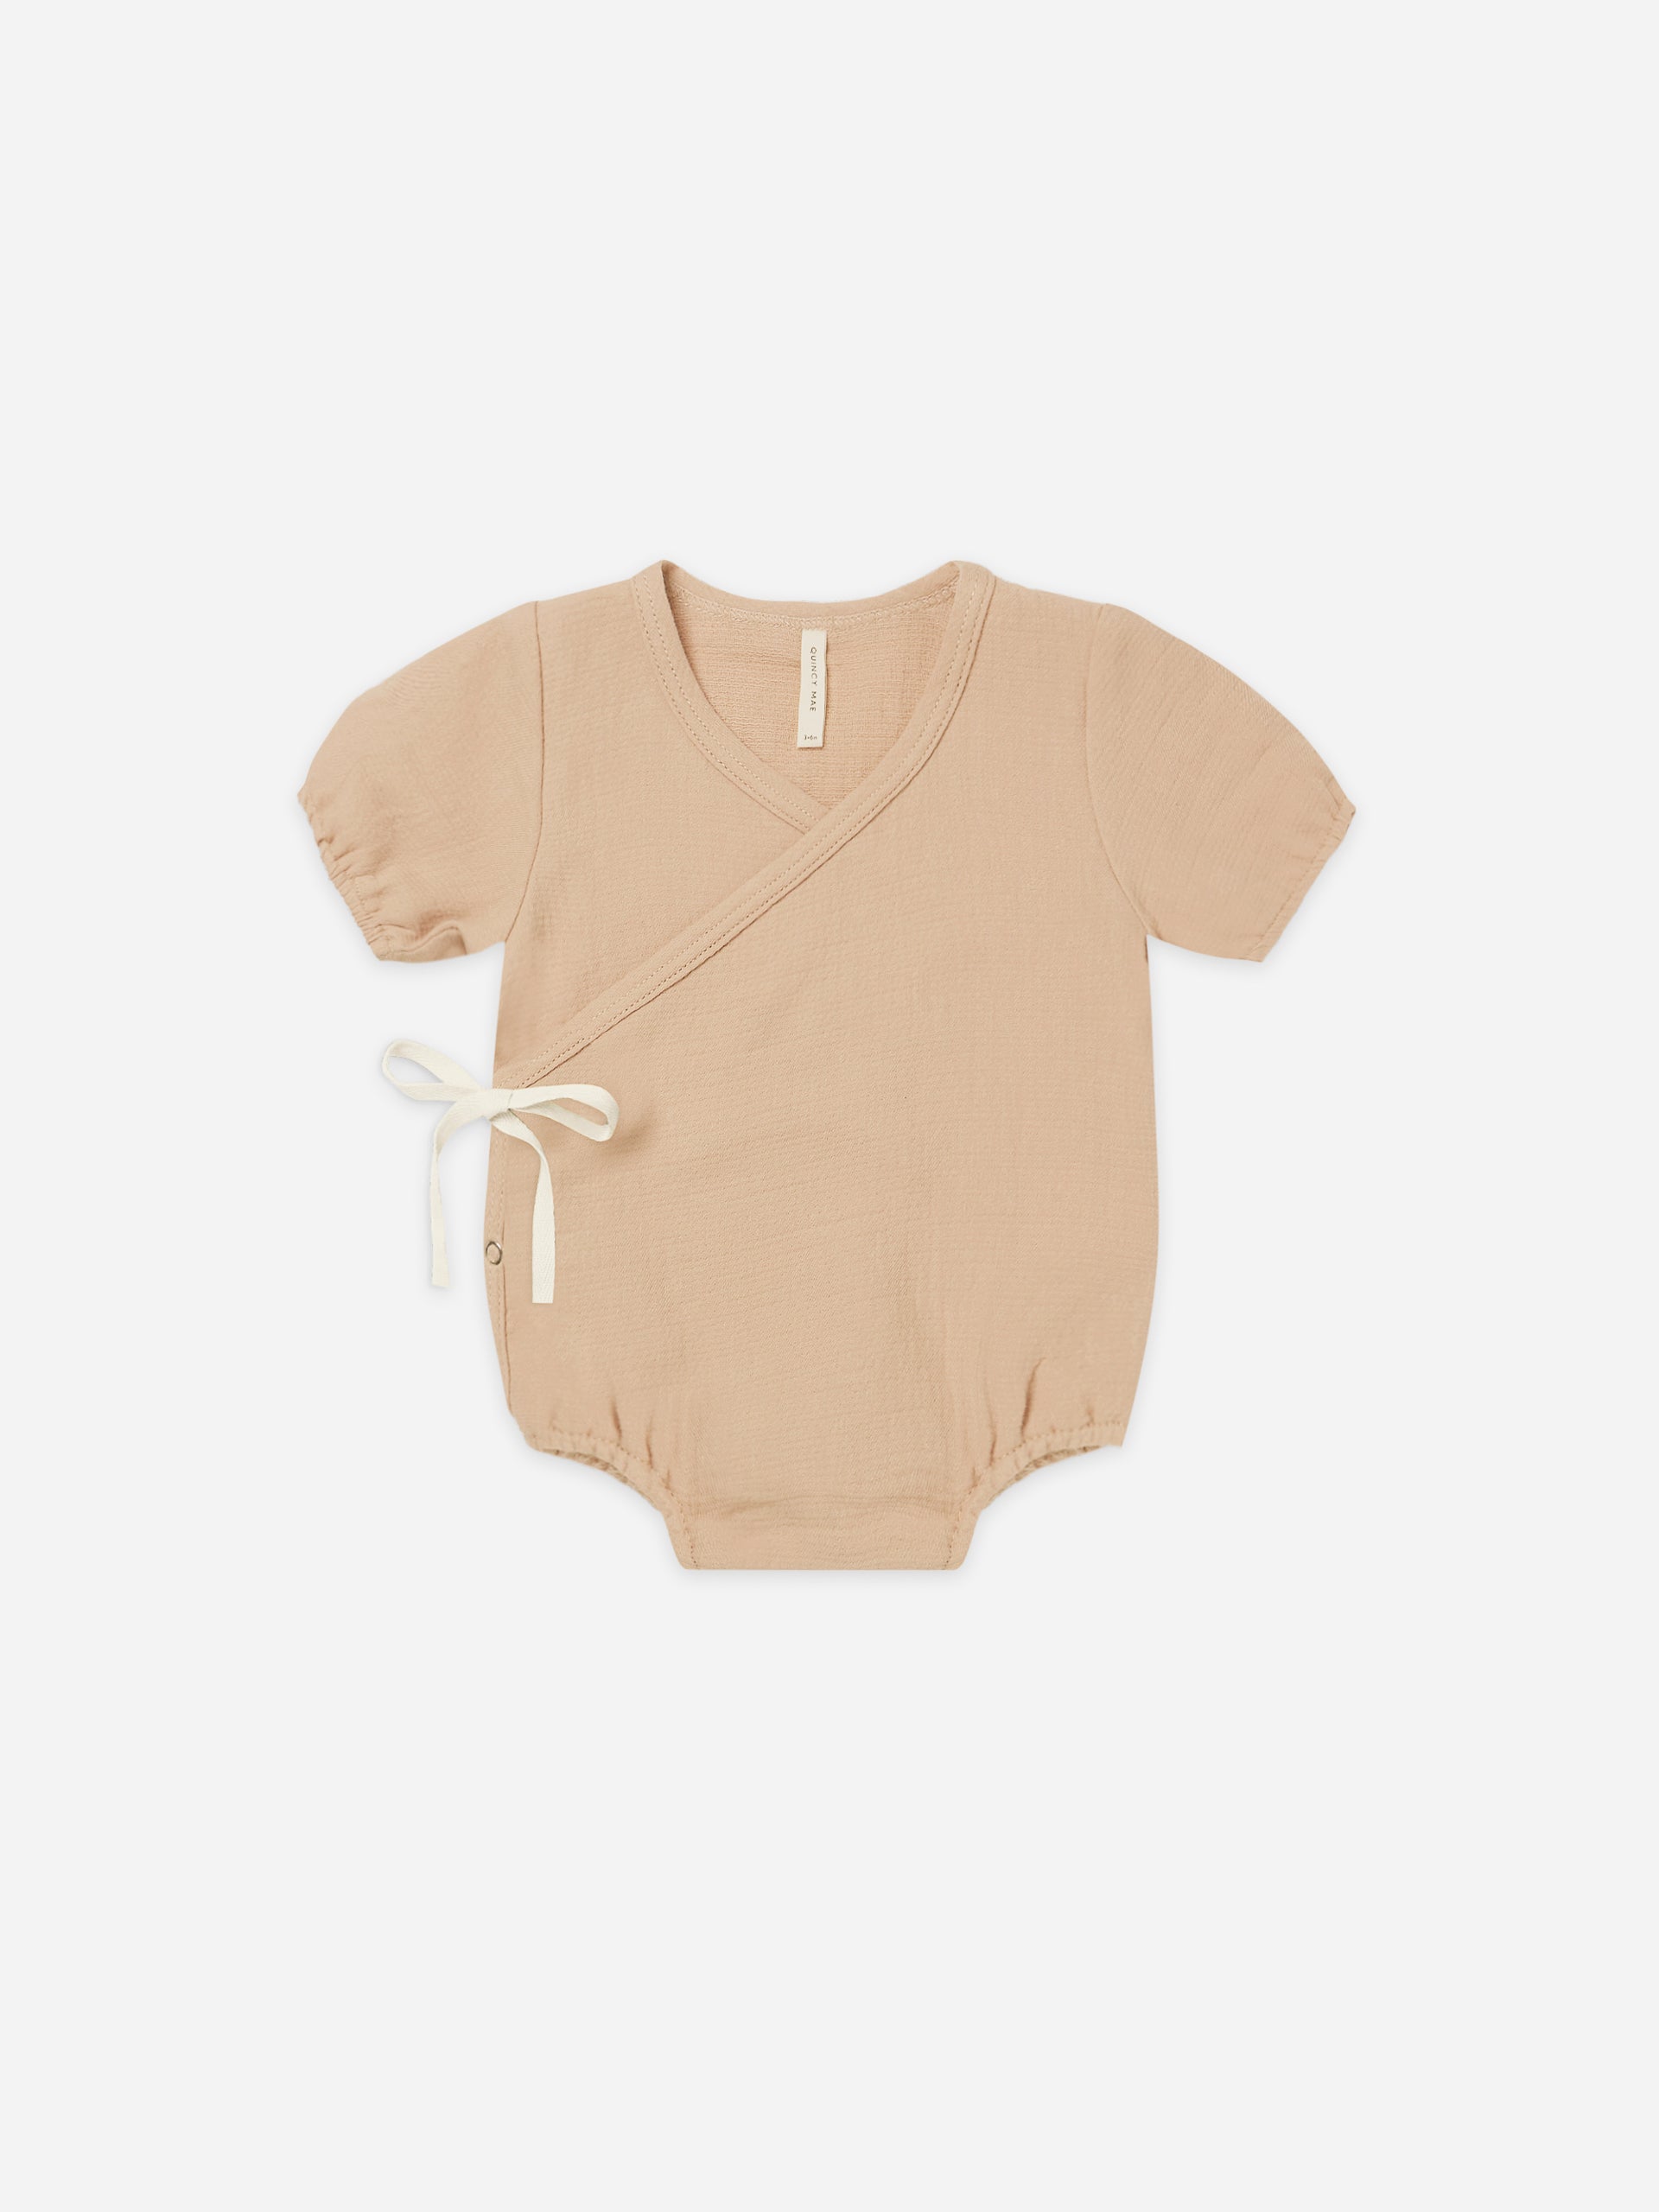 woven wrap romper | apricot - Quincy Mae | Baby Basics | Baby Clothing | Organic Baby Clothes | Modern Baby Boy Clothes |